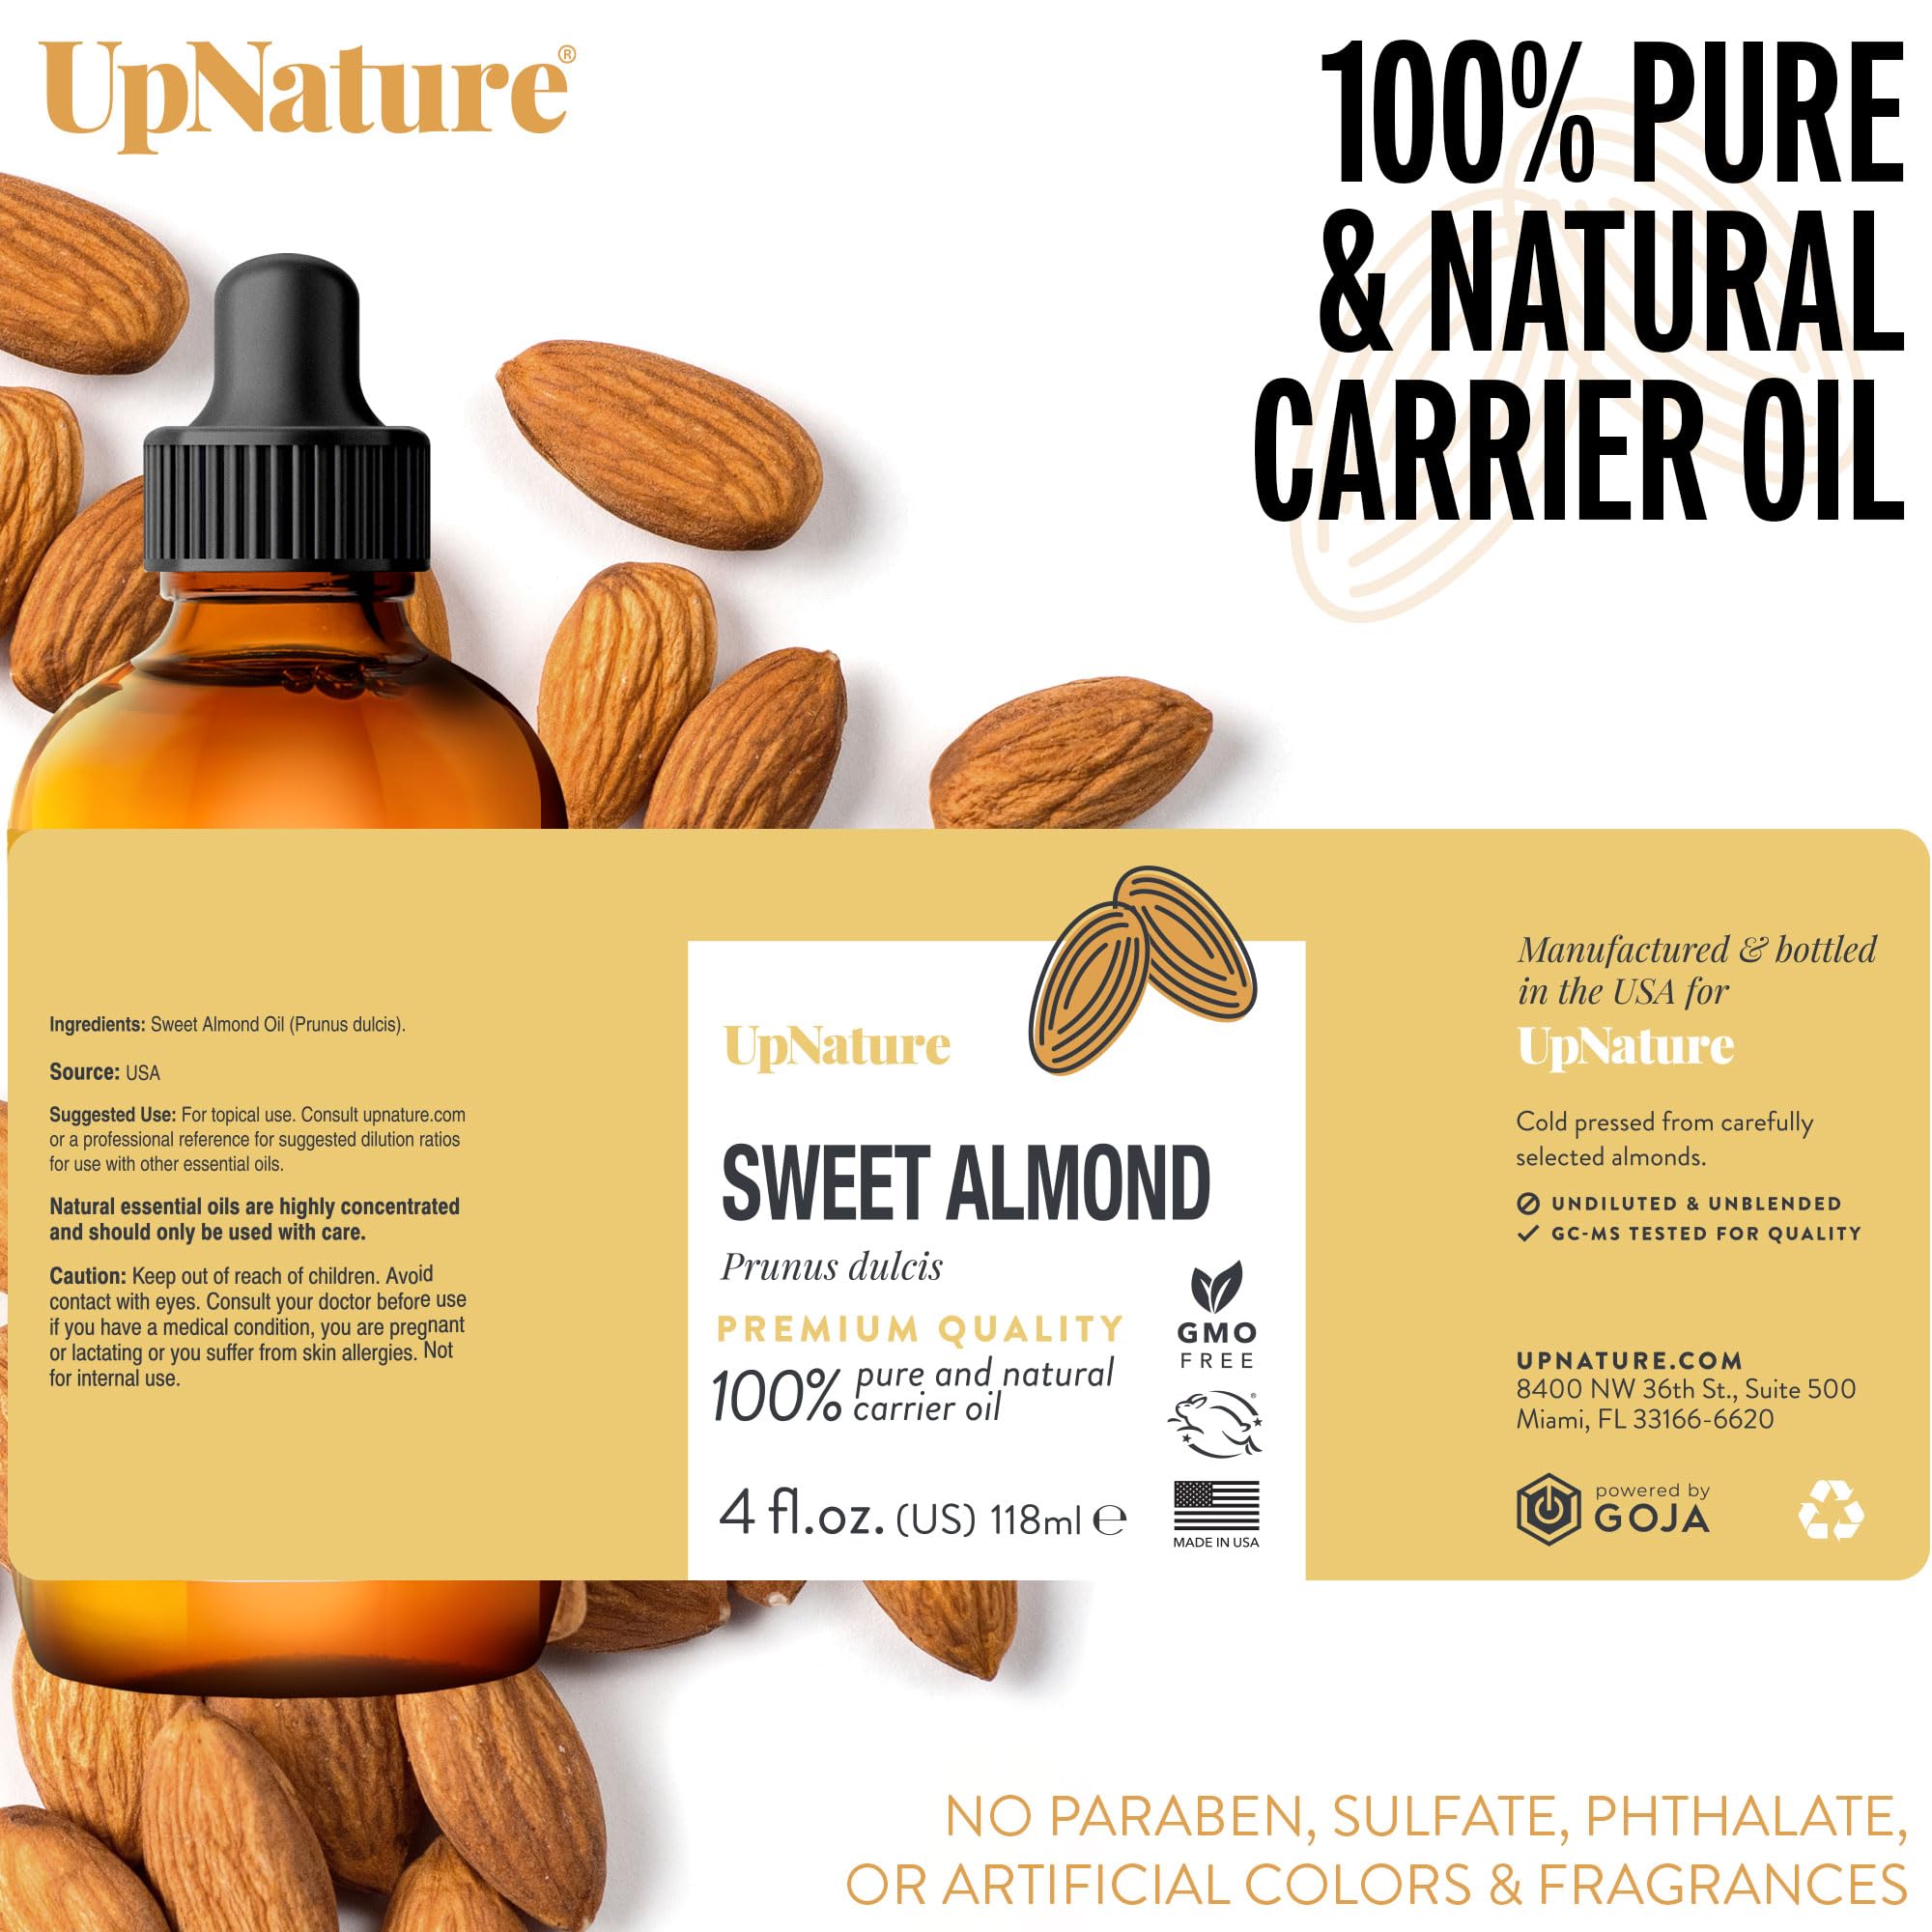 UpNature Clove Essential Oil - 100% Natural & Pure, Undiluted, Premium Quality Aromatherapy Oil Relief & Promotes Healthy Gums, Clove Oil for Tooth Aches, Soothe Headaches, 4oz